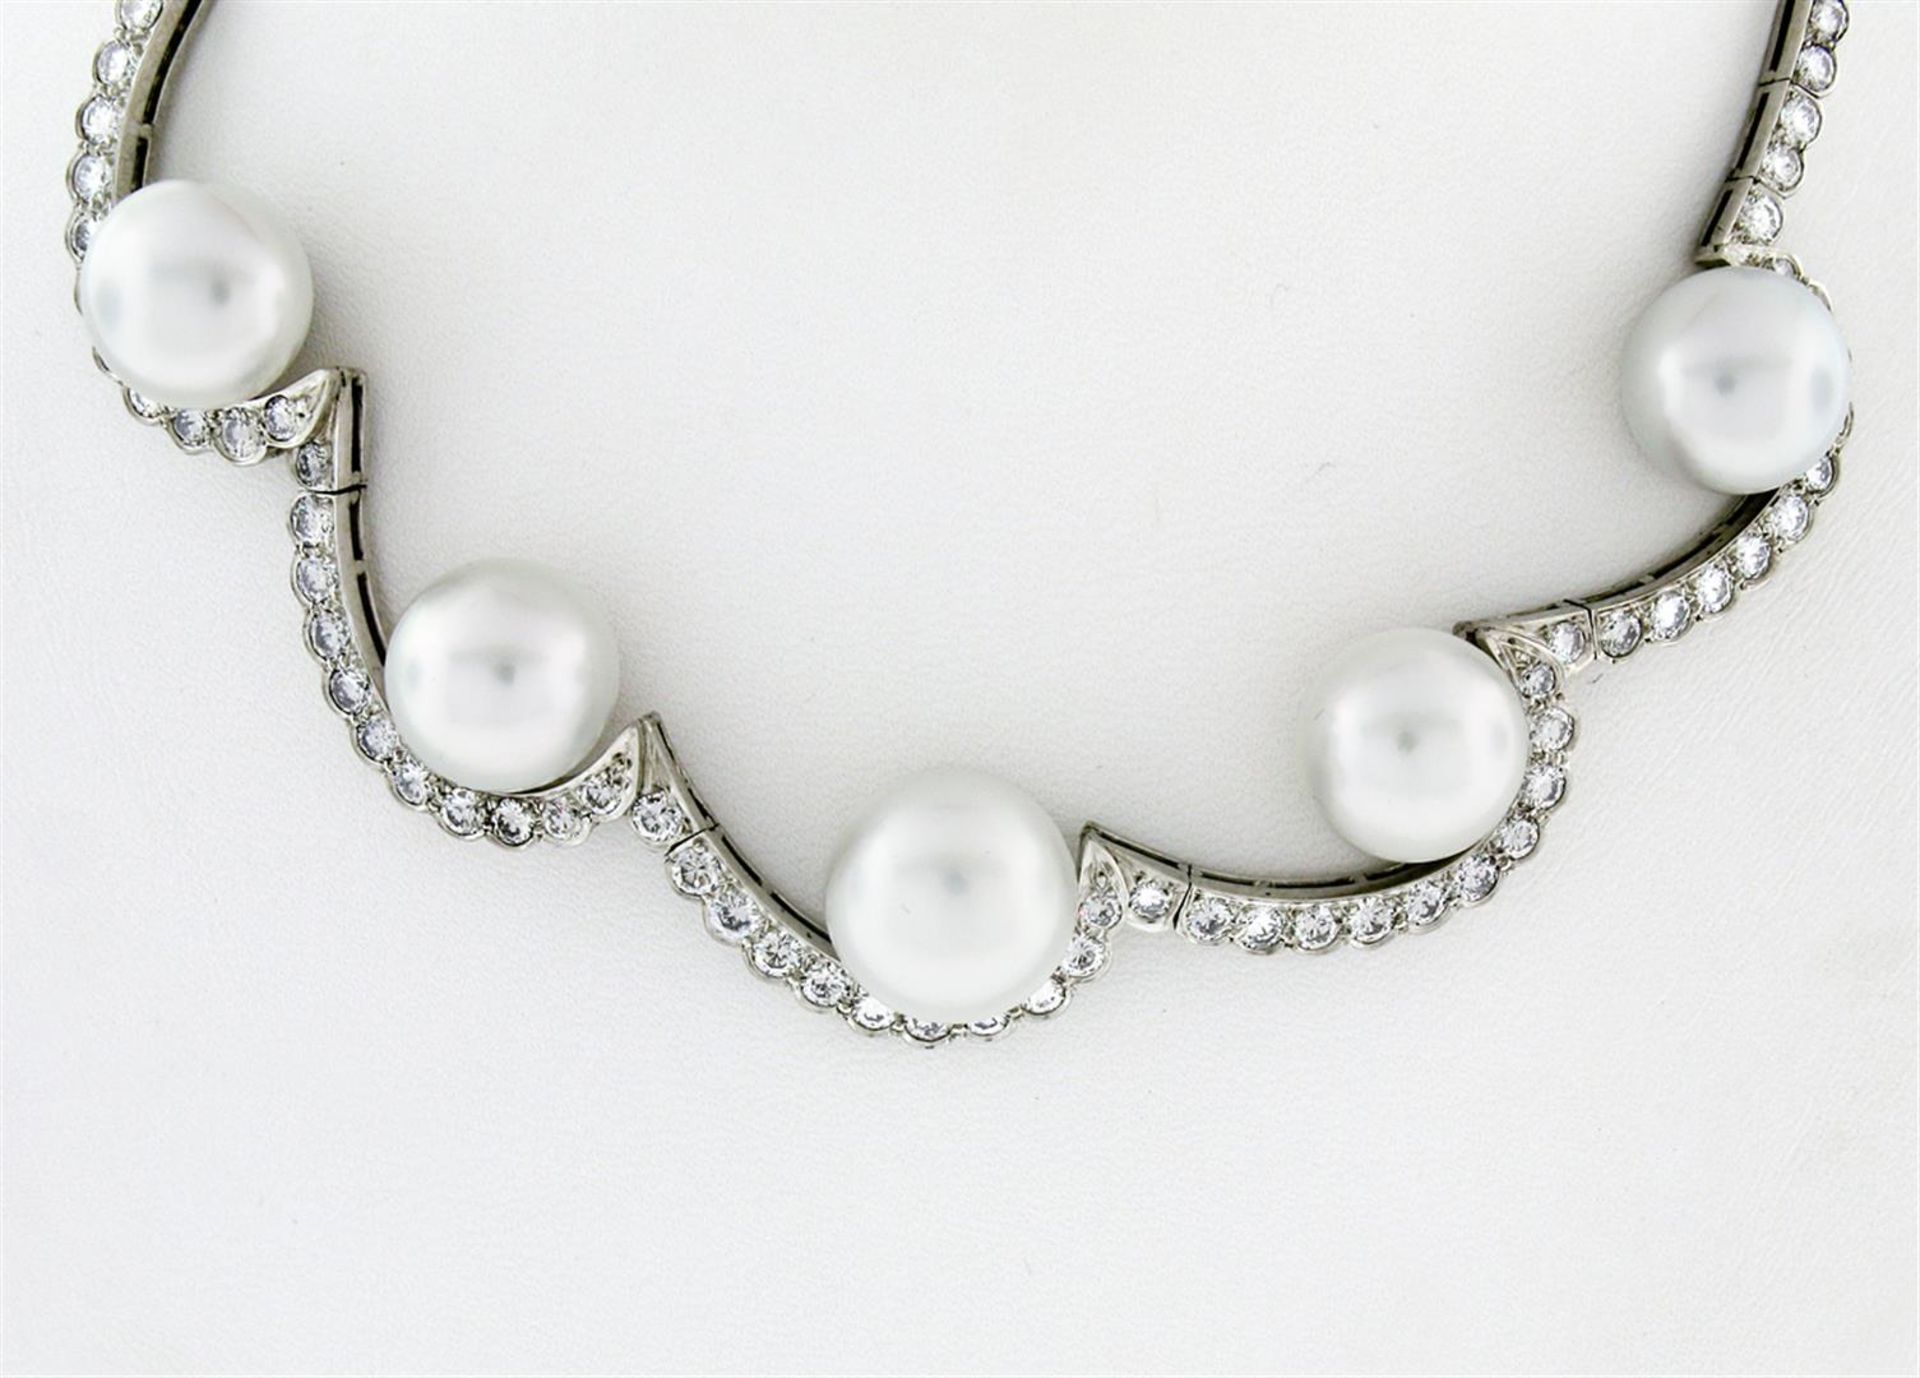 Platinum 10.25ctw Diamond & Floating South Sea Pearl Statement Necklace - Image 2 of 9